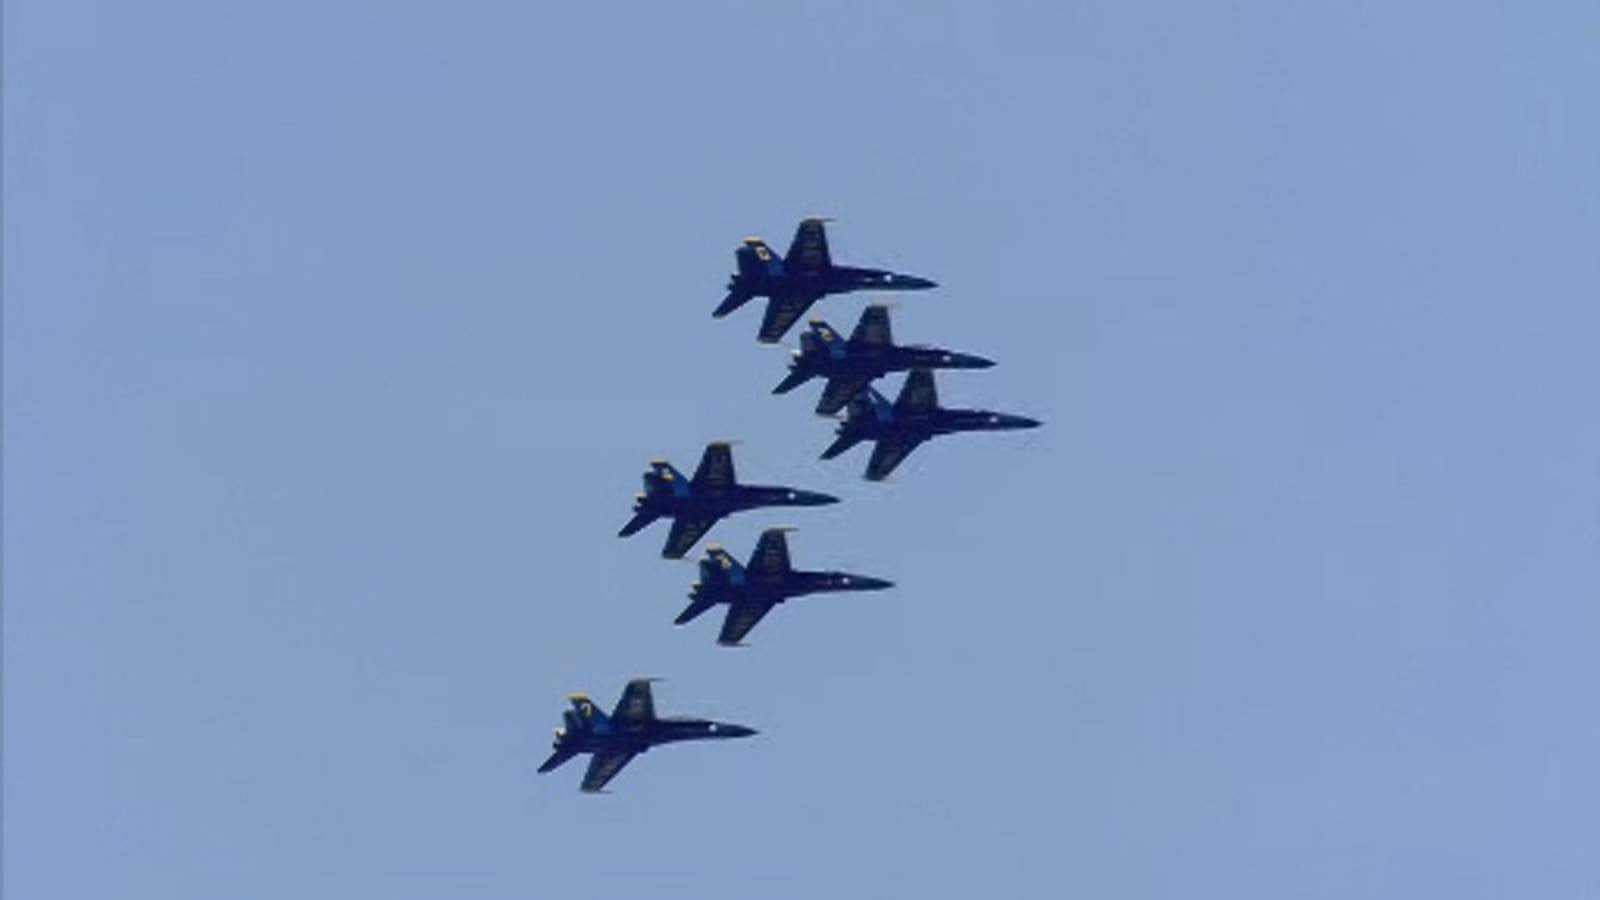 Missed the show? Here are 24 photos of the Blue Angels flying over the Houston area